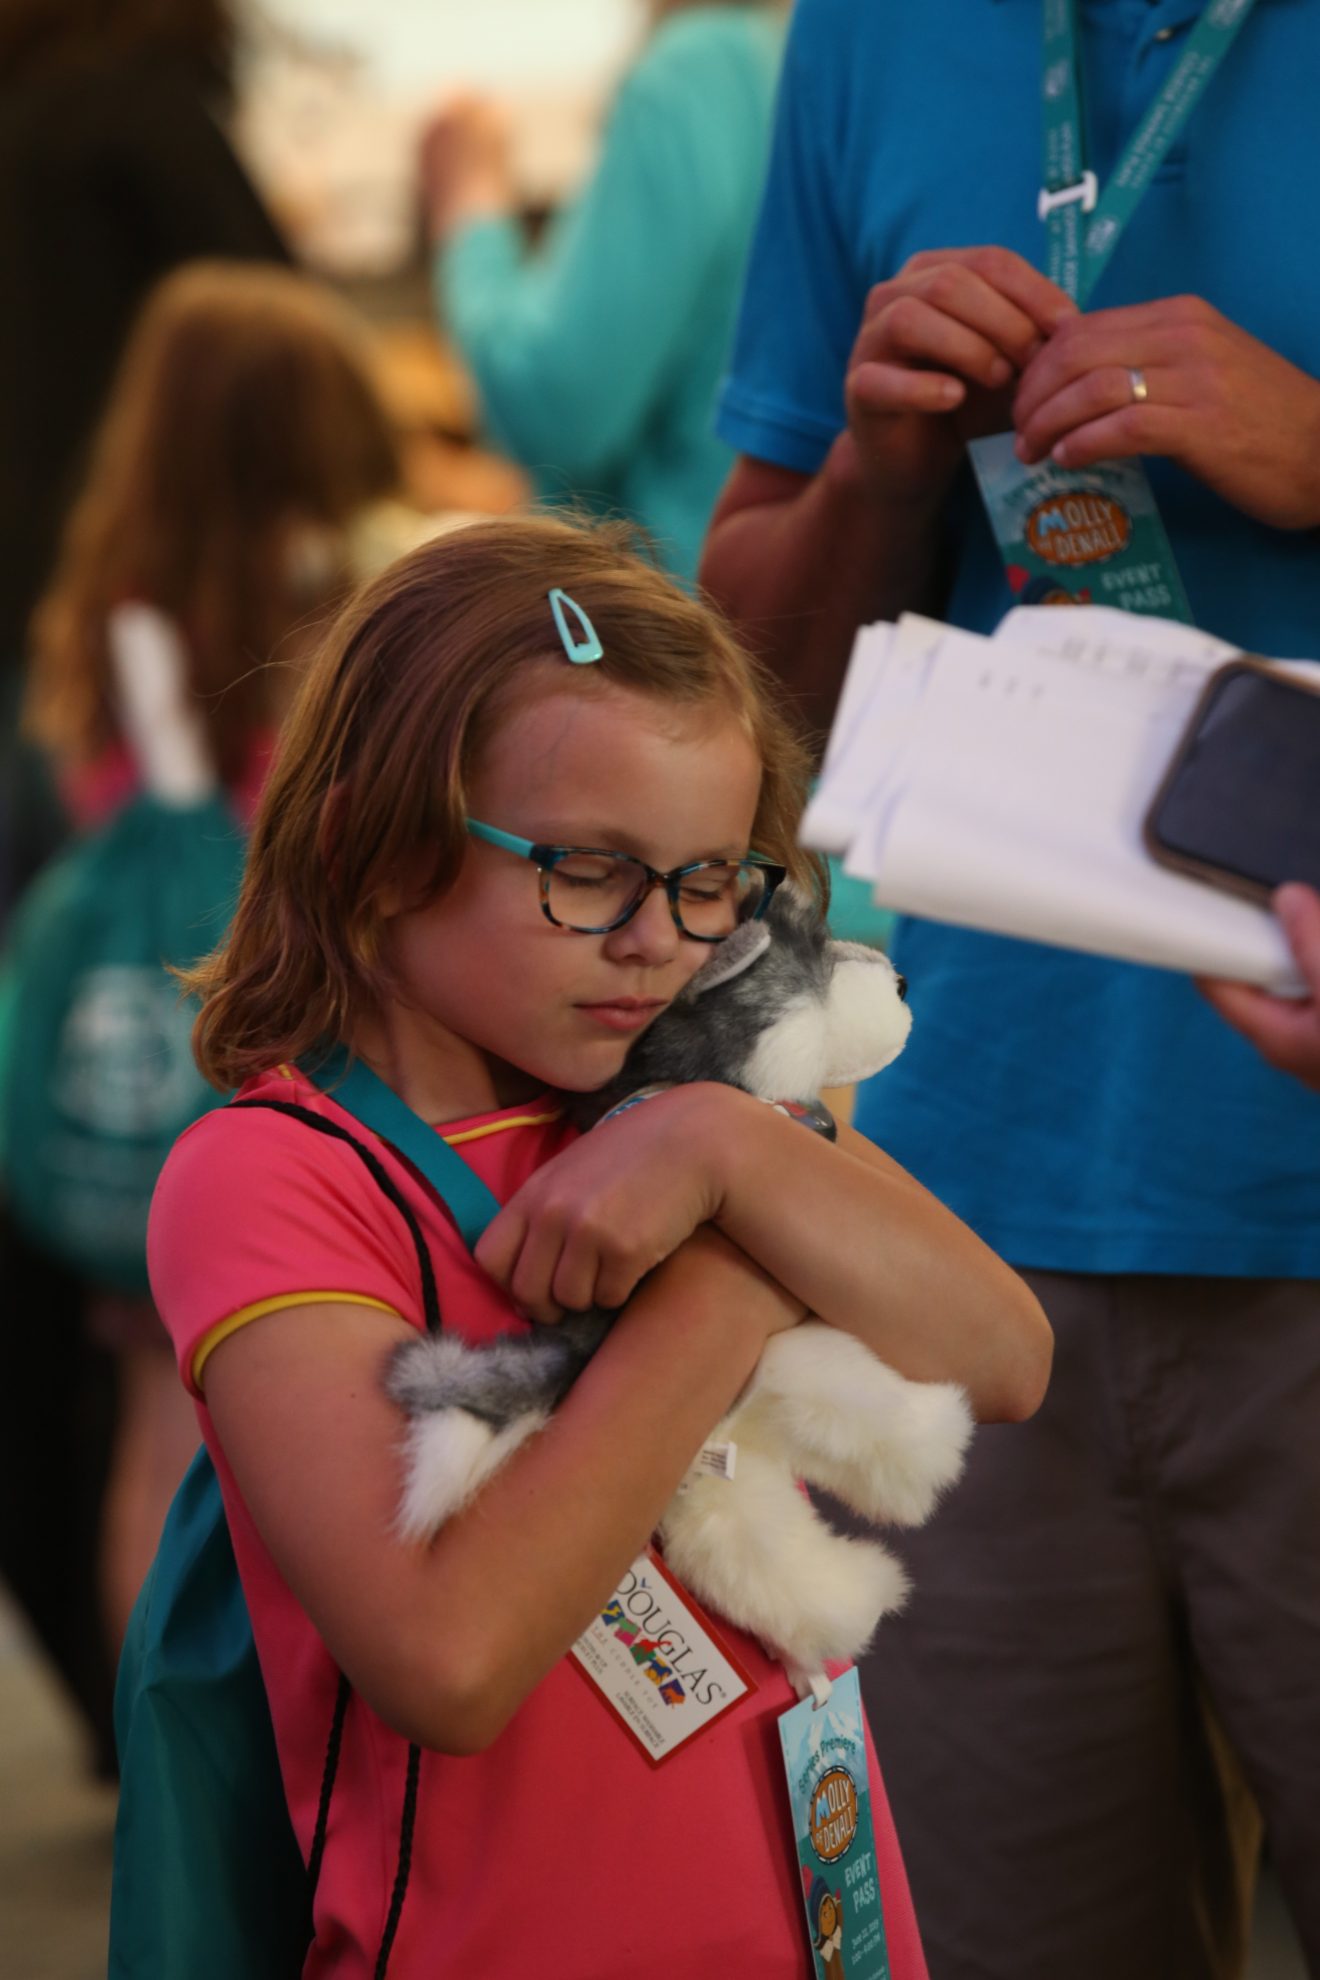 A young girl closes her eyes and hugs a stuffed dog. She stands near two adults and another child. Everyone is wearing Molly of Denali backpacks or lanyards.